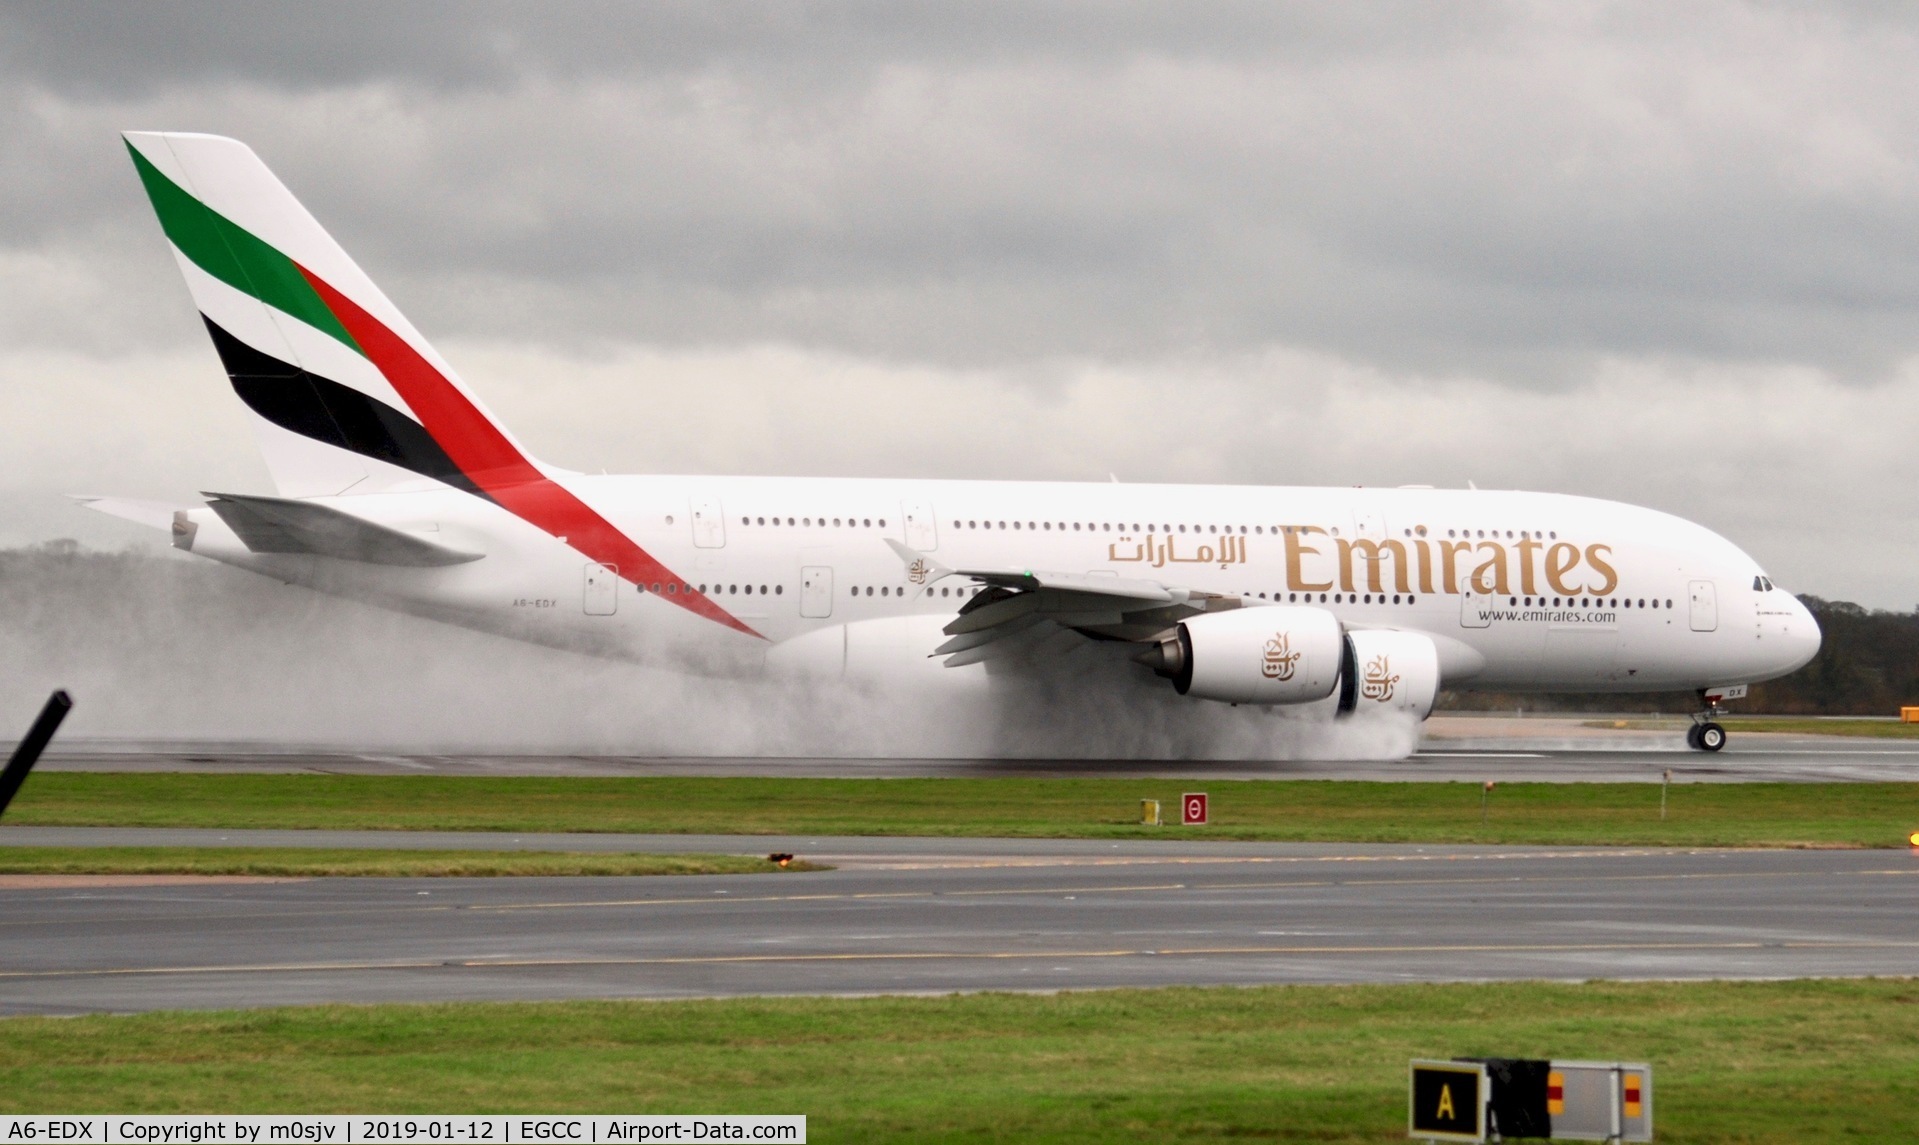 A6-EDX, 2012 Airbus A380-861 C/N 105, Taken From RVP on a Cold and Damp Saturday